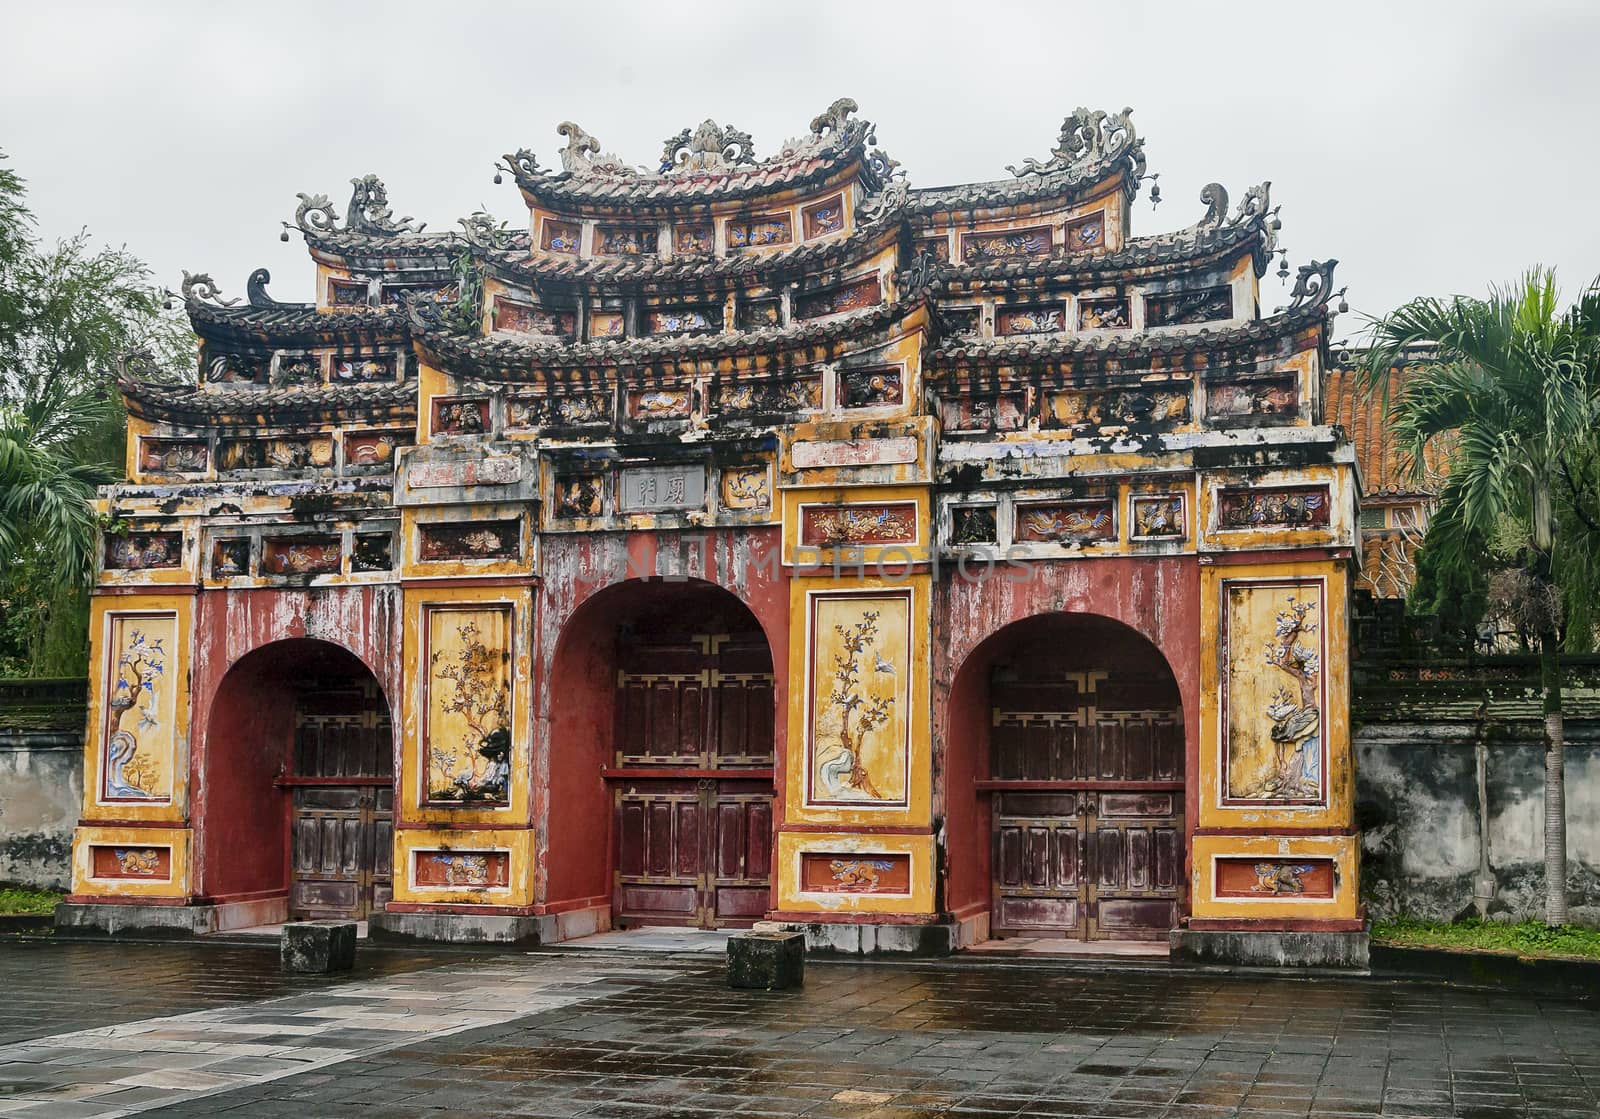 The Gate to the Citadel of the Imperial City in Hue, Vietnam by Goodday